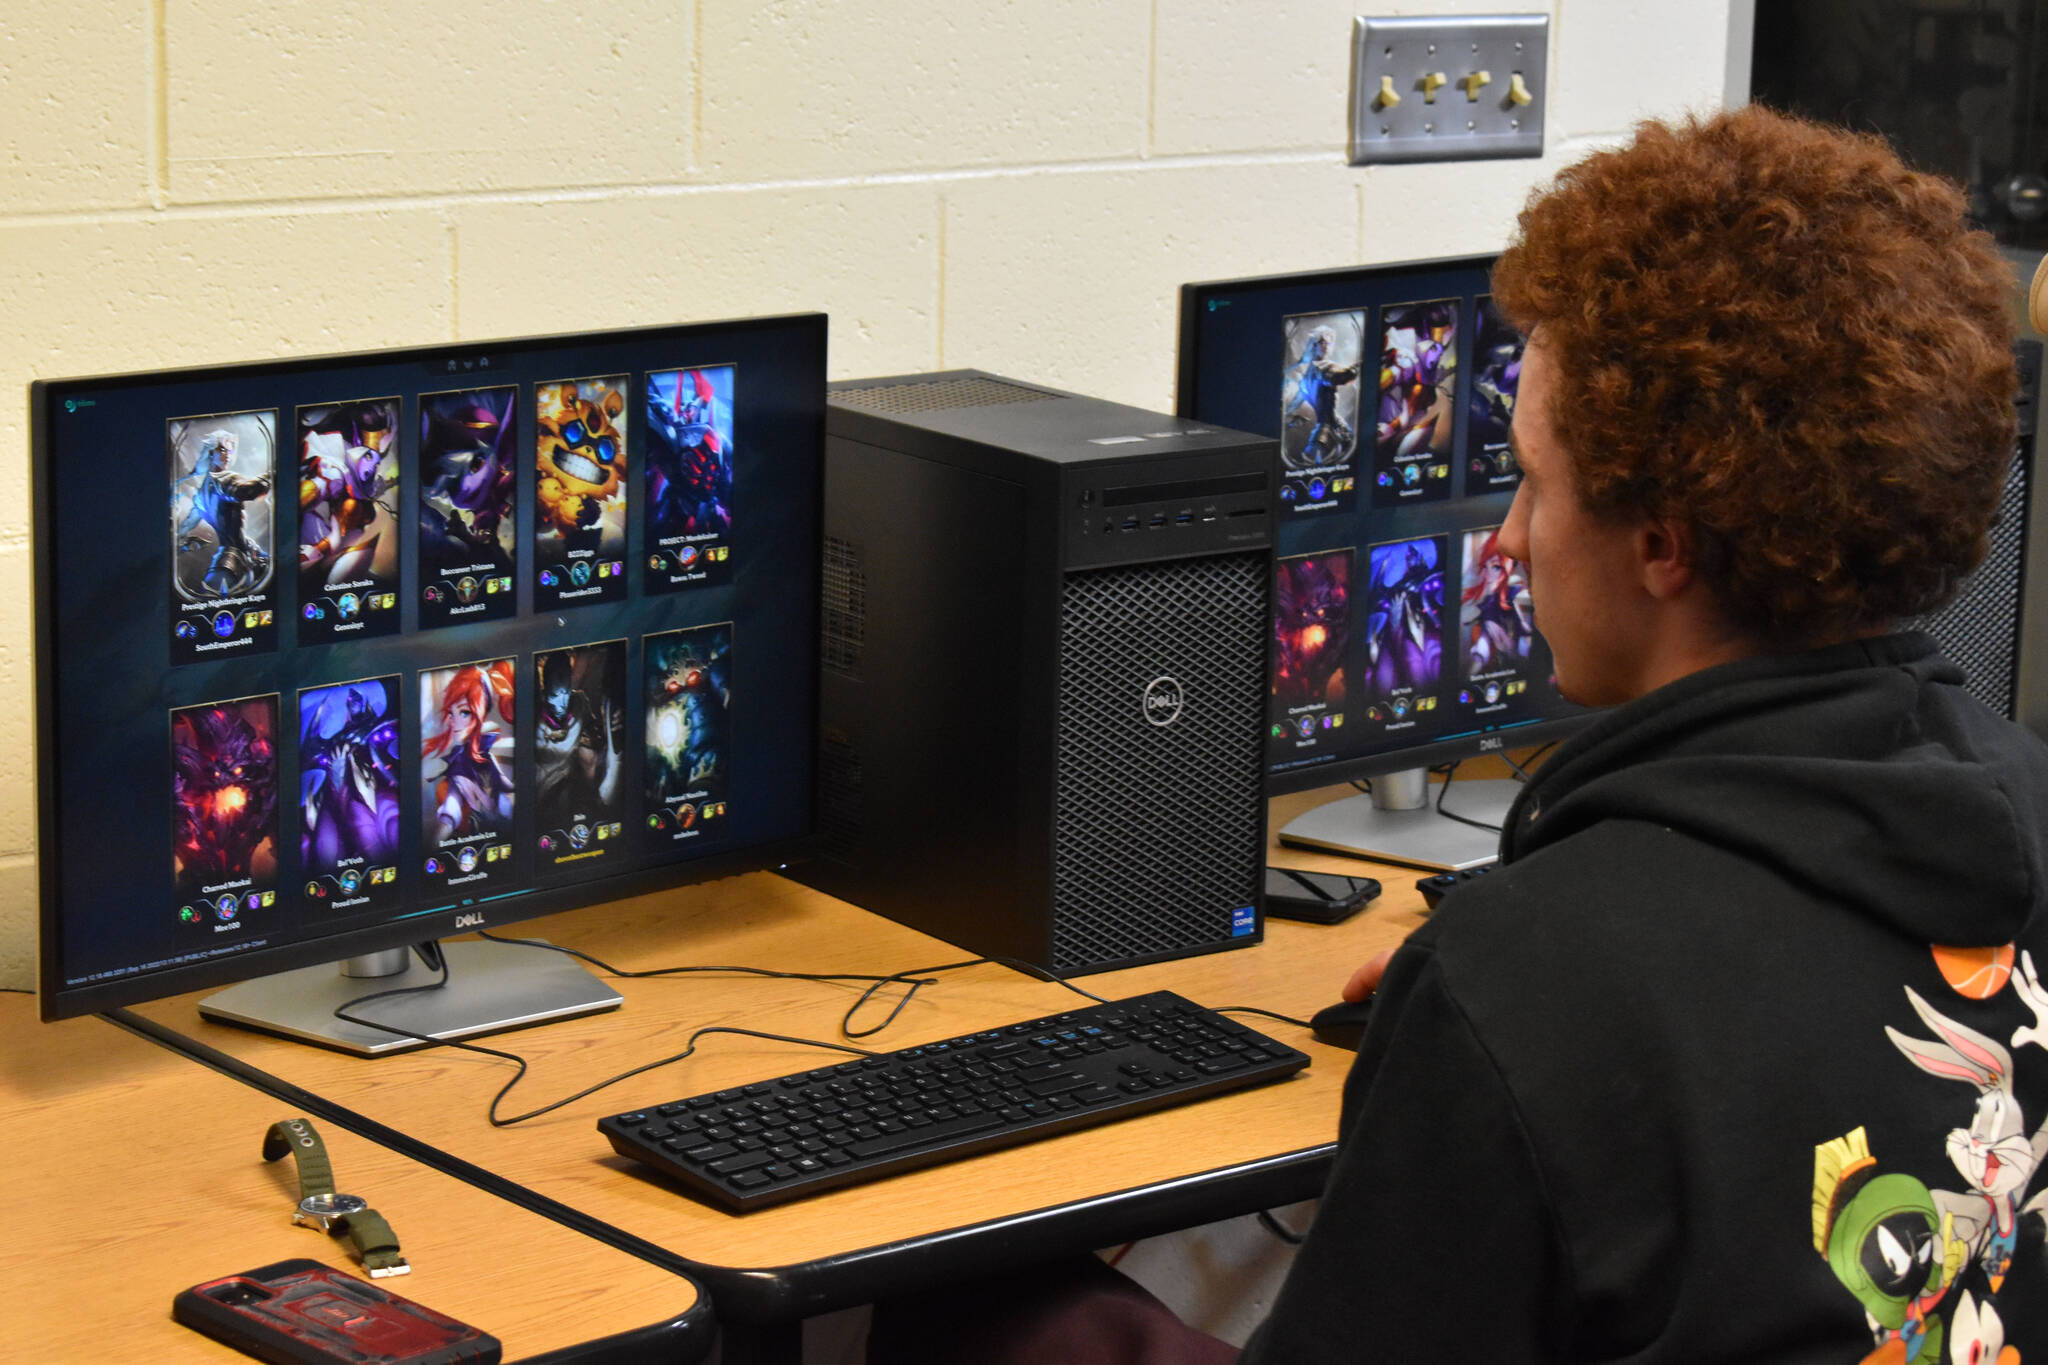 Kenai League of Legends team captain Silas Thibodeau waits for the second game to start during a match on Tuesday, Sept. 27, 2022 at Kenai Central High School in Kenai, Alaska. (Jake Dye/Peninsula Clarion)